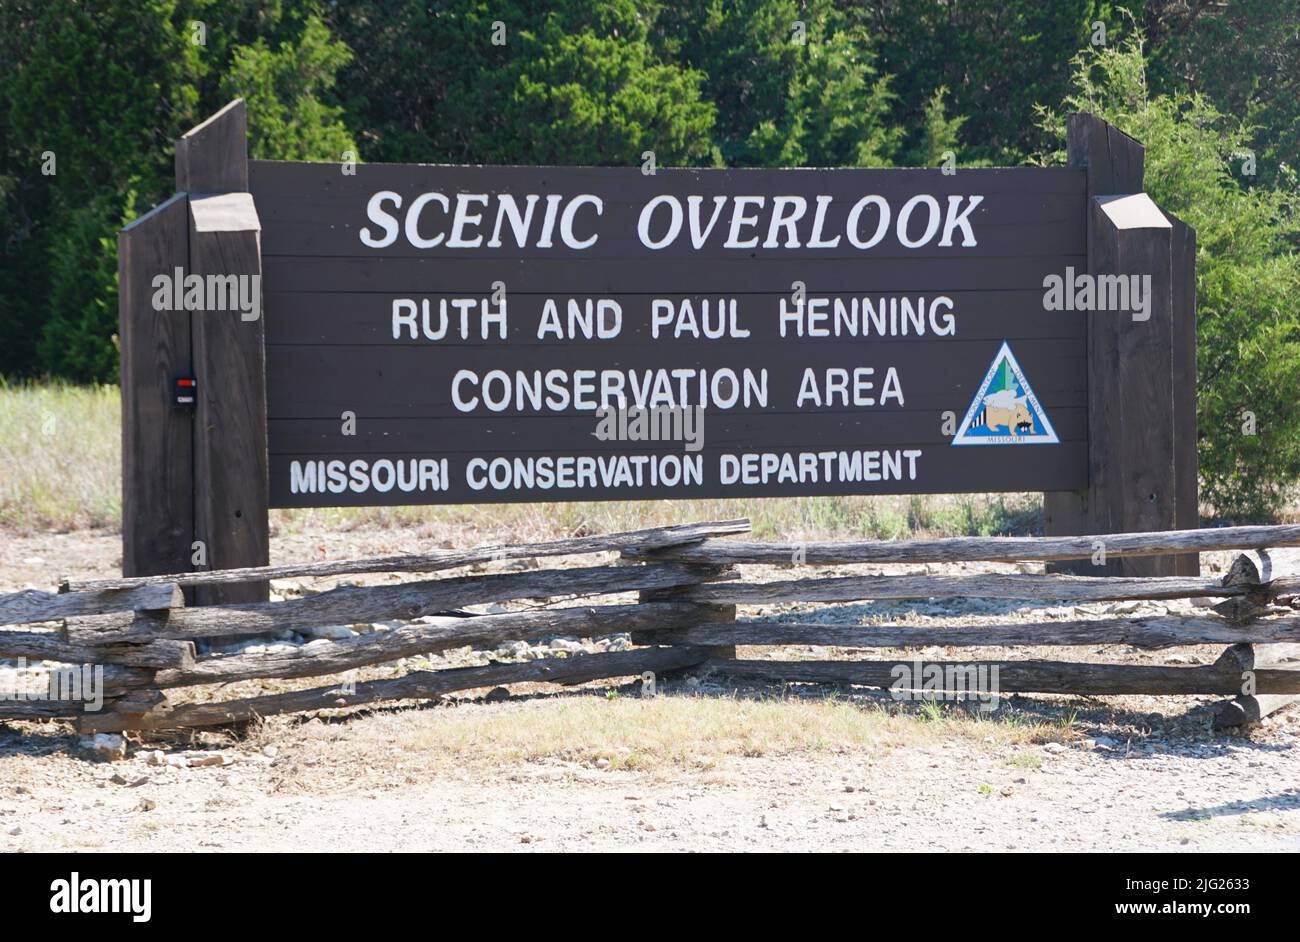 Branson, Missouri, U.S.A - June 21, 2022 - The entrance sign into the scenic overlook of Ruth and Paul Henning Conservation Area Stock Photo